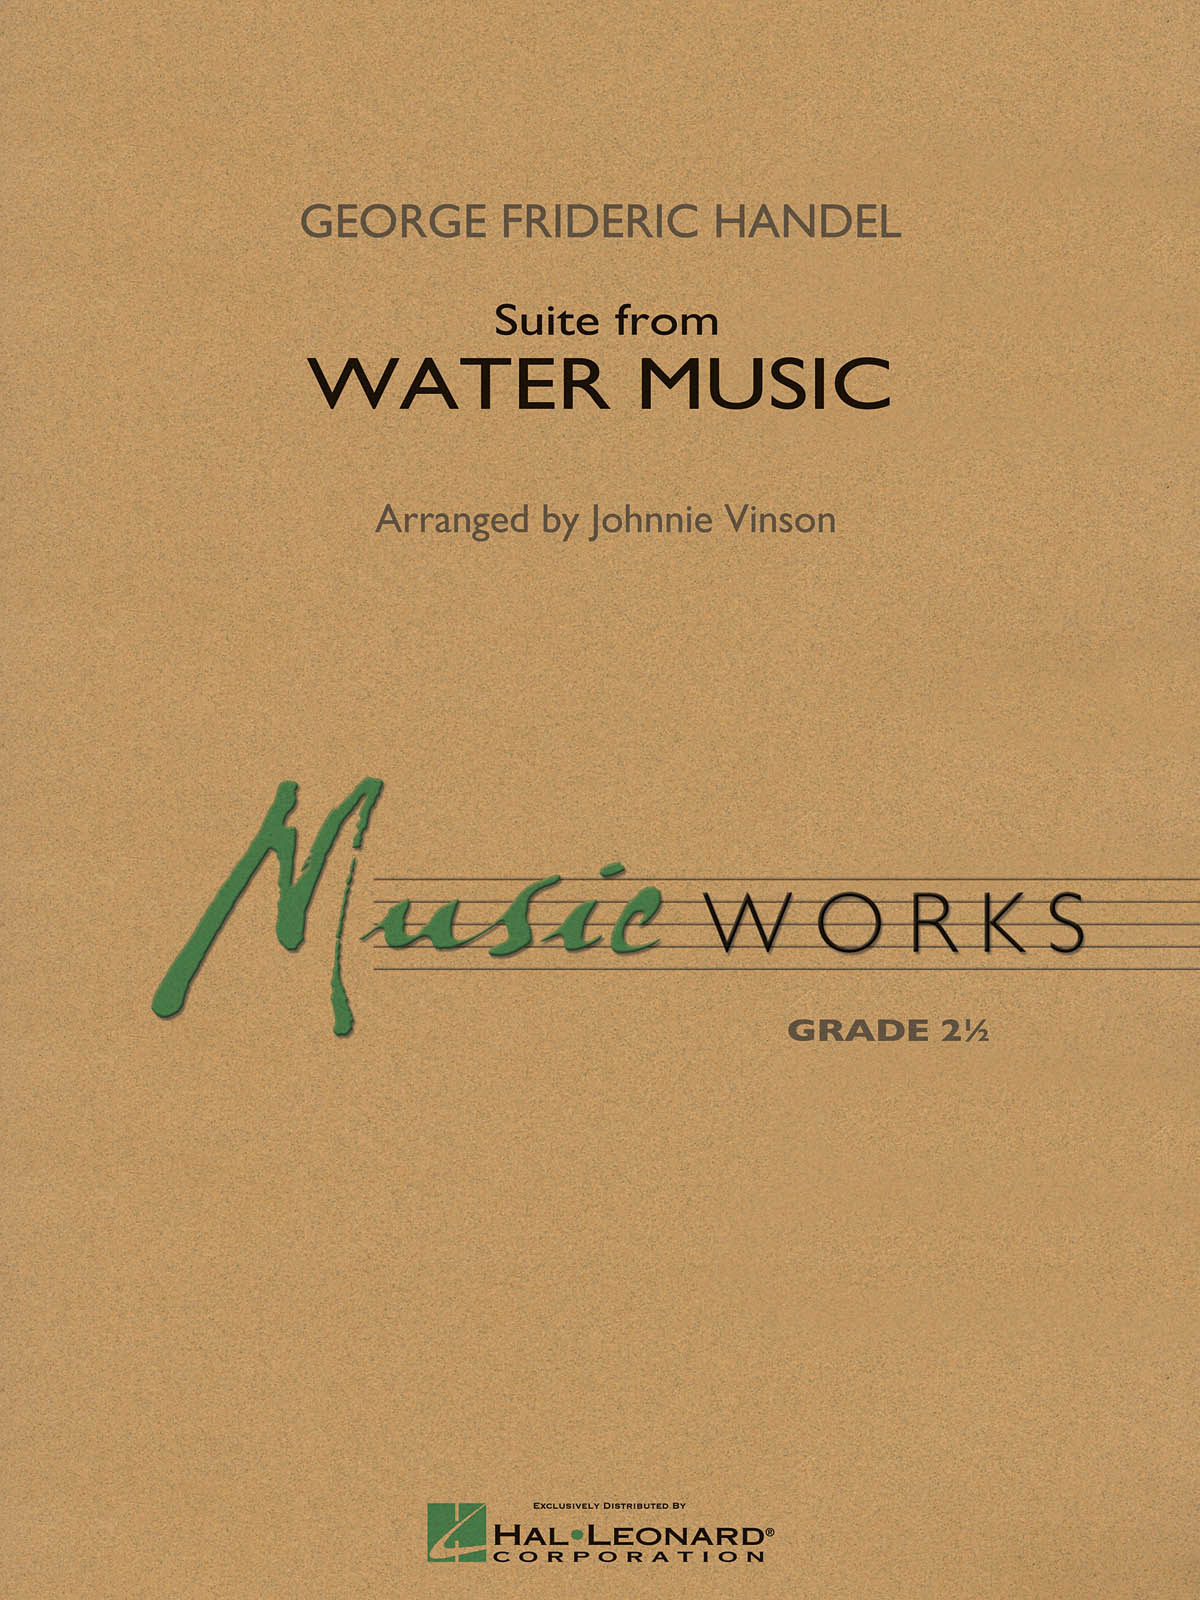 Georg Friedrich Hndel: Suite from Water Music: Concert Band: Score